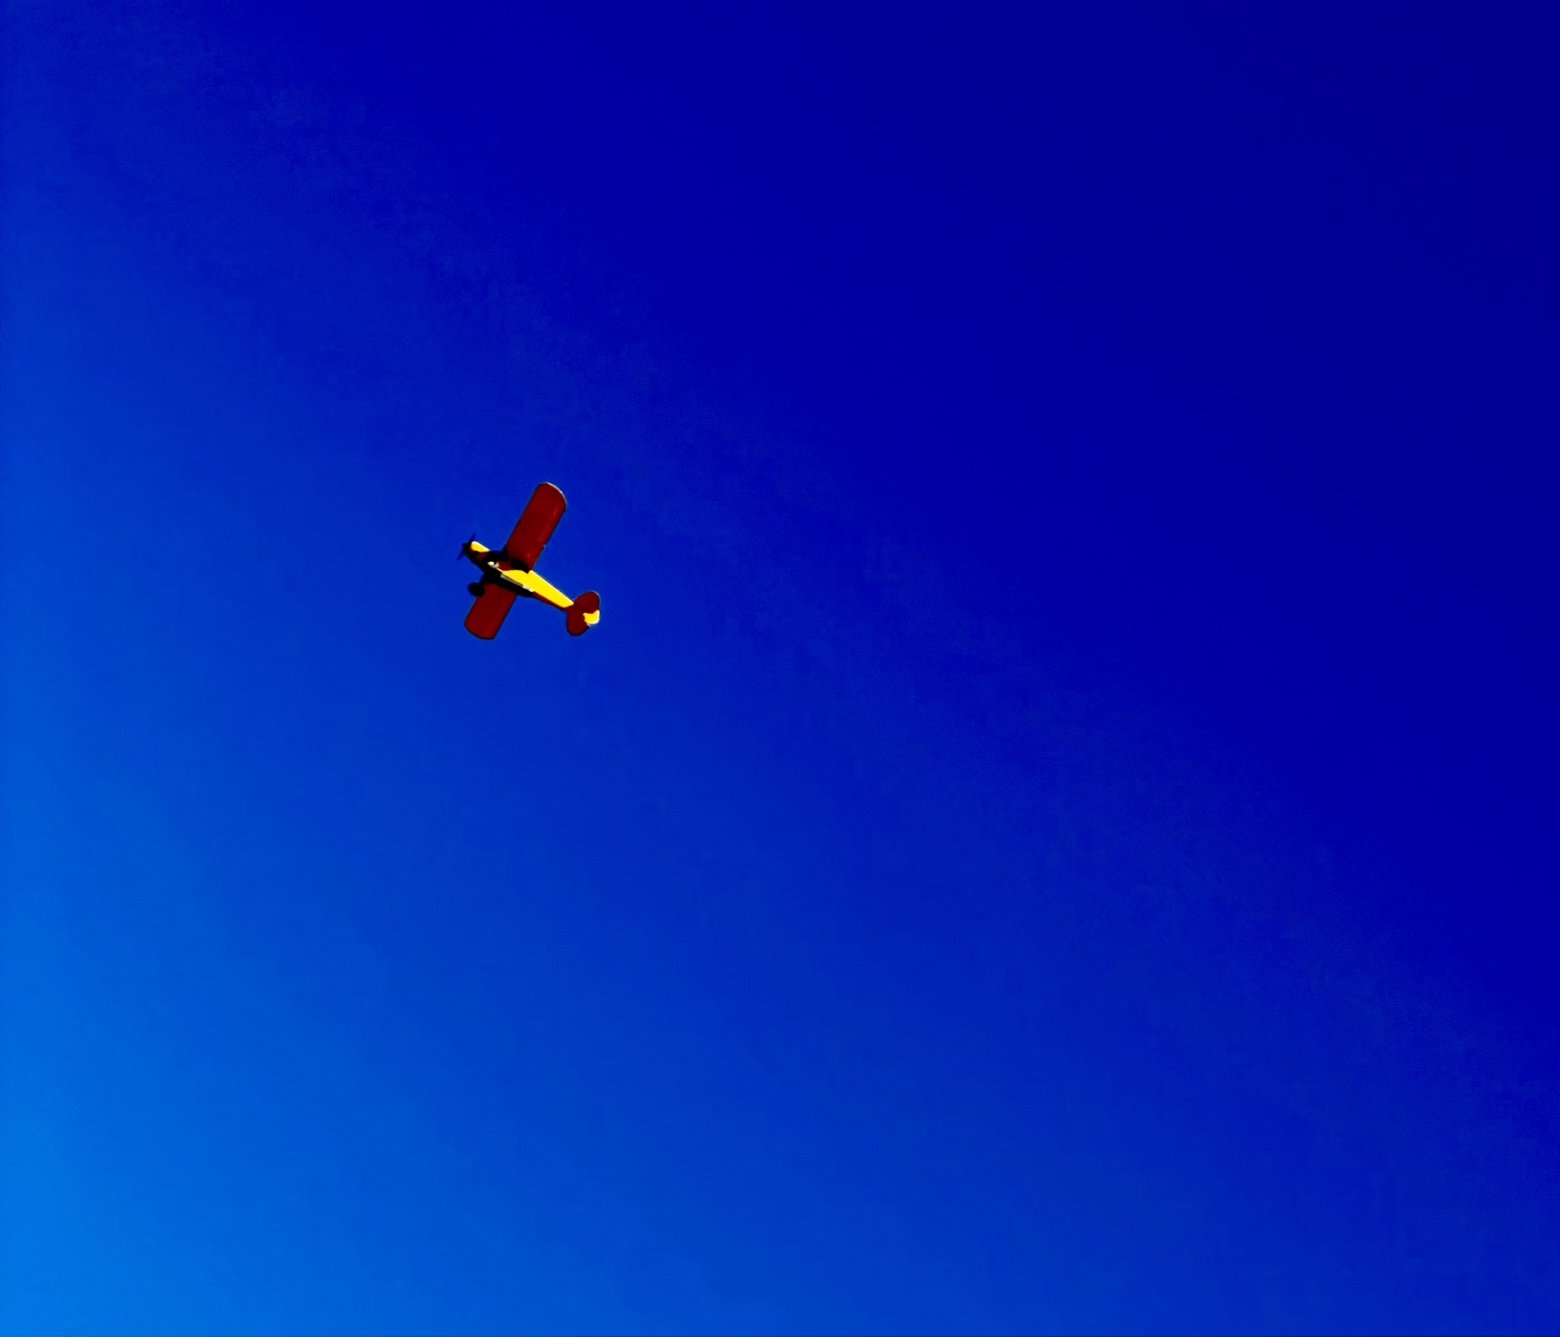 Low flying plane and blue sky